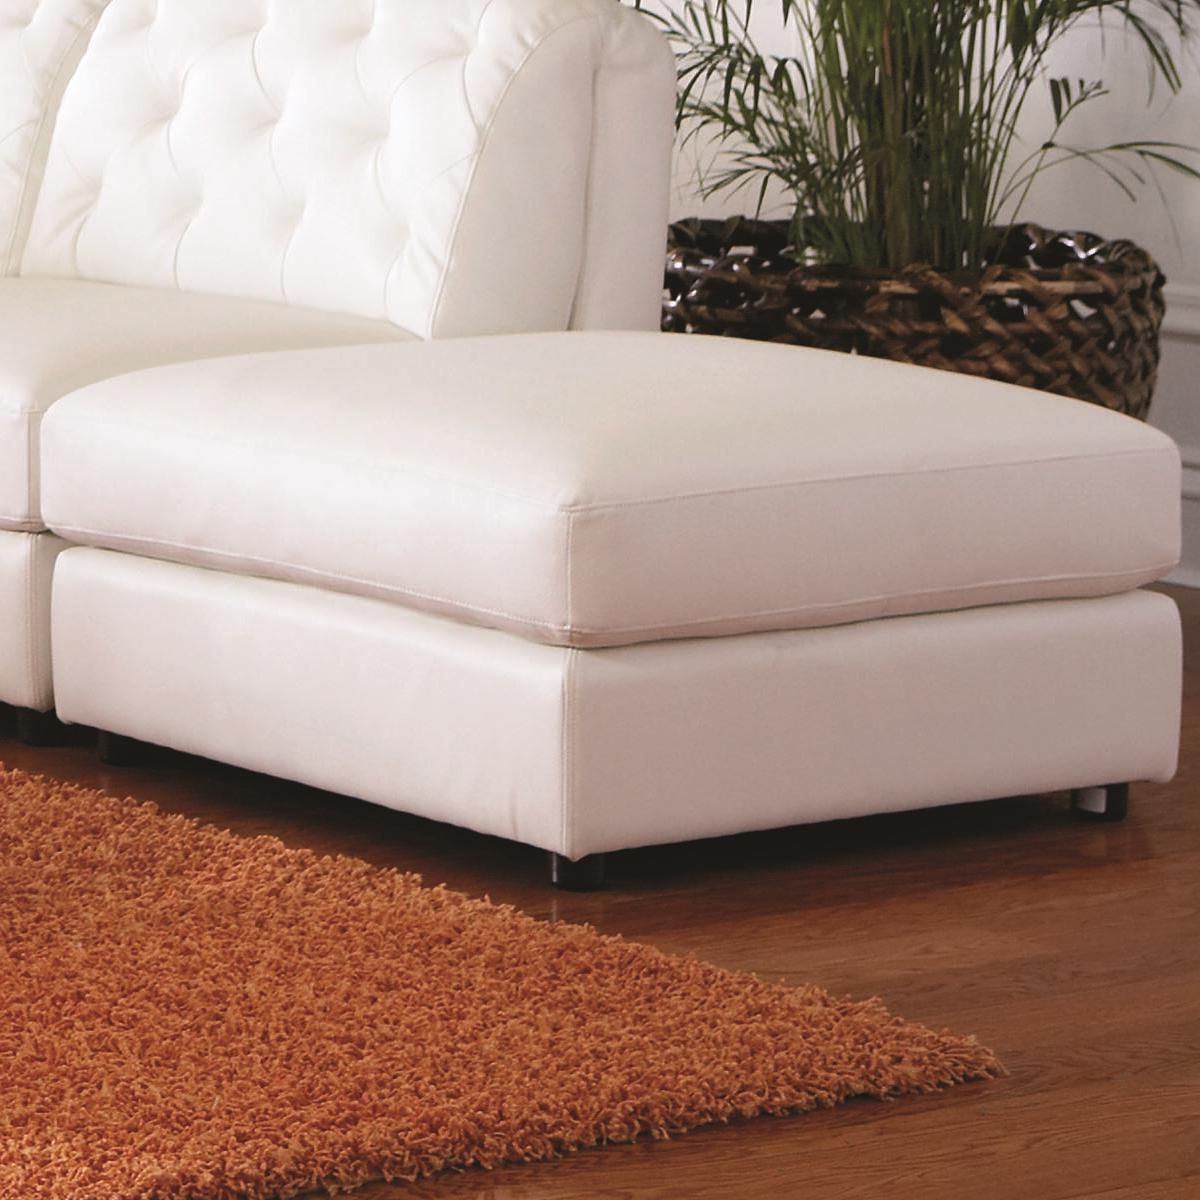 Wood Ottoman, Ottoman Furniture Throughout Favorite White And Blush Fabric Square Ottomans (View 6 of 10)